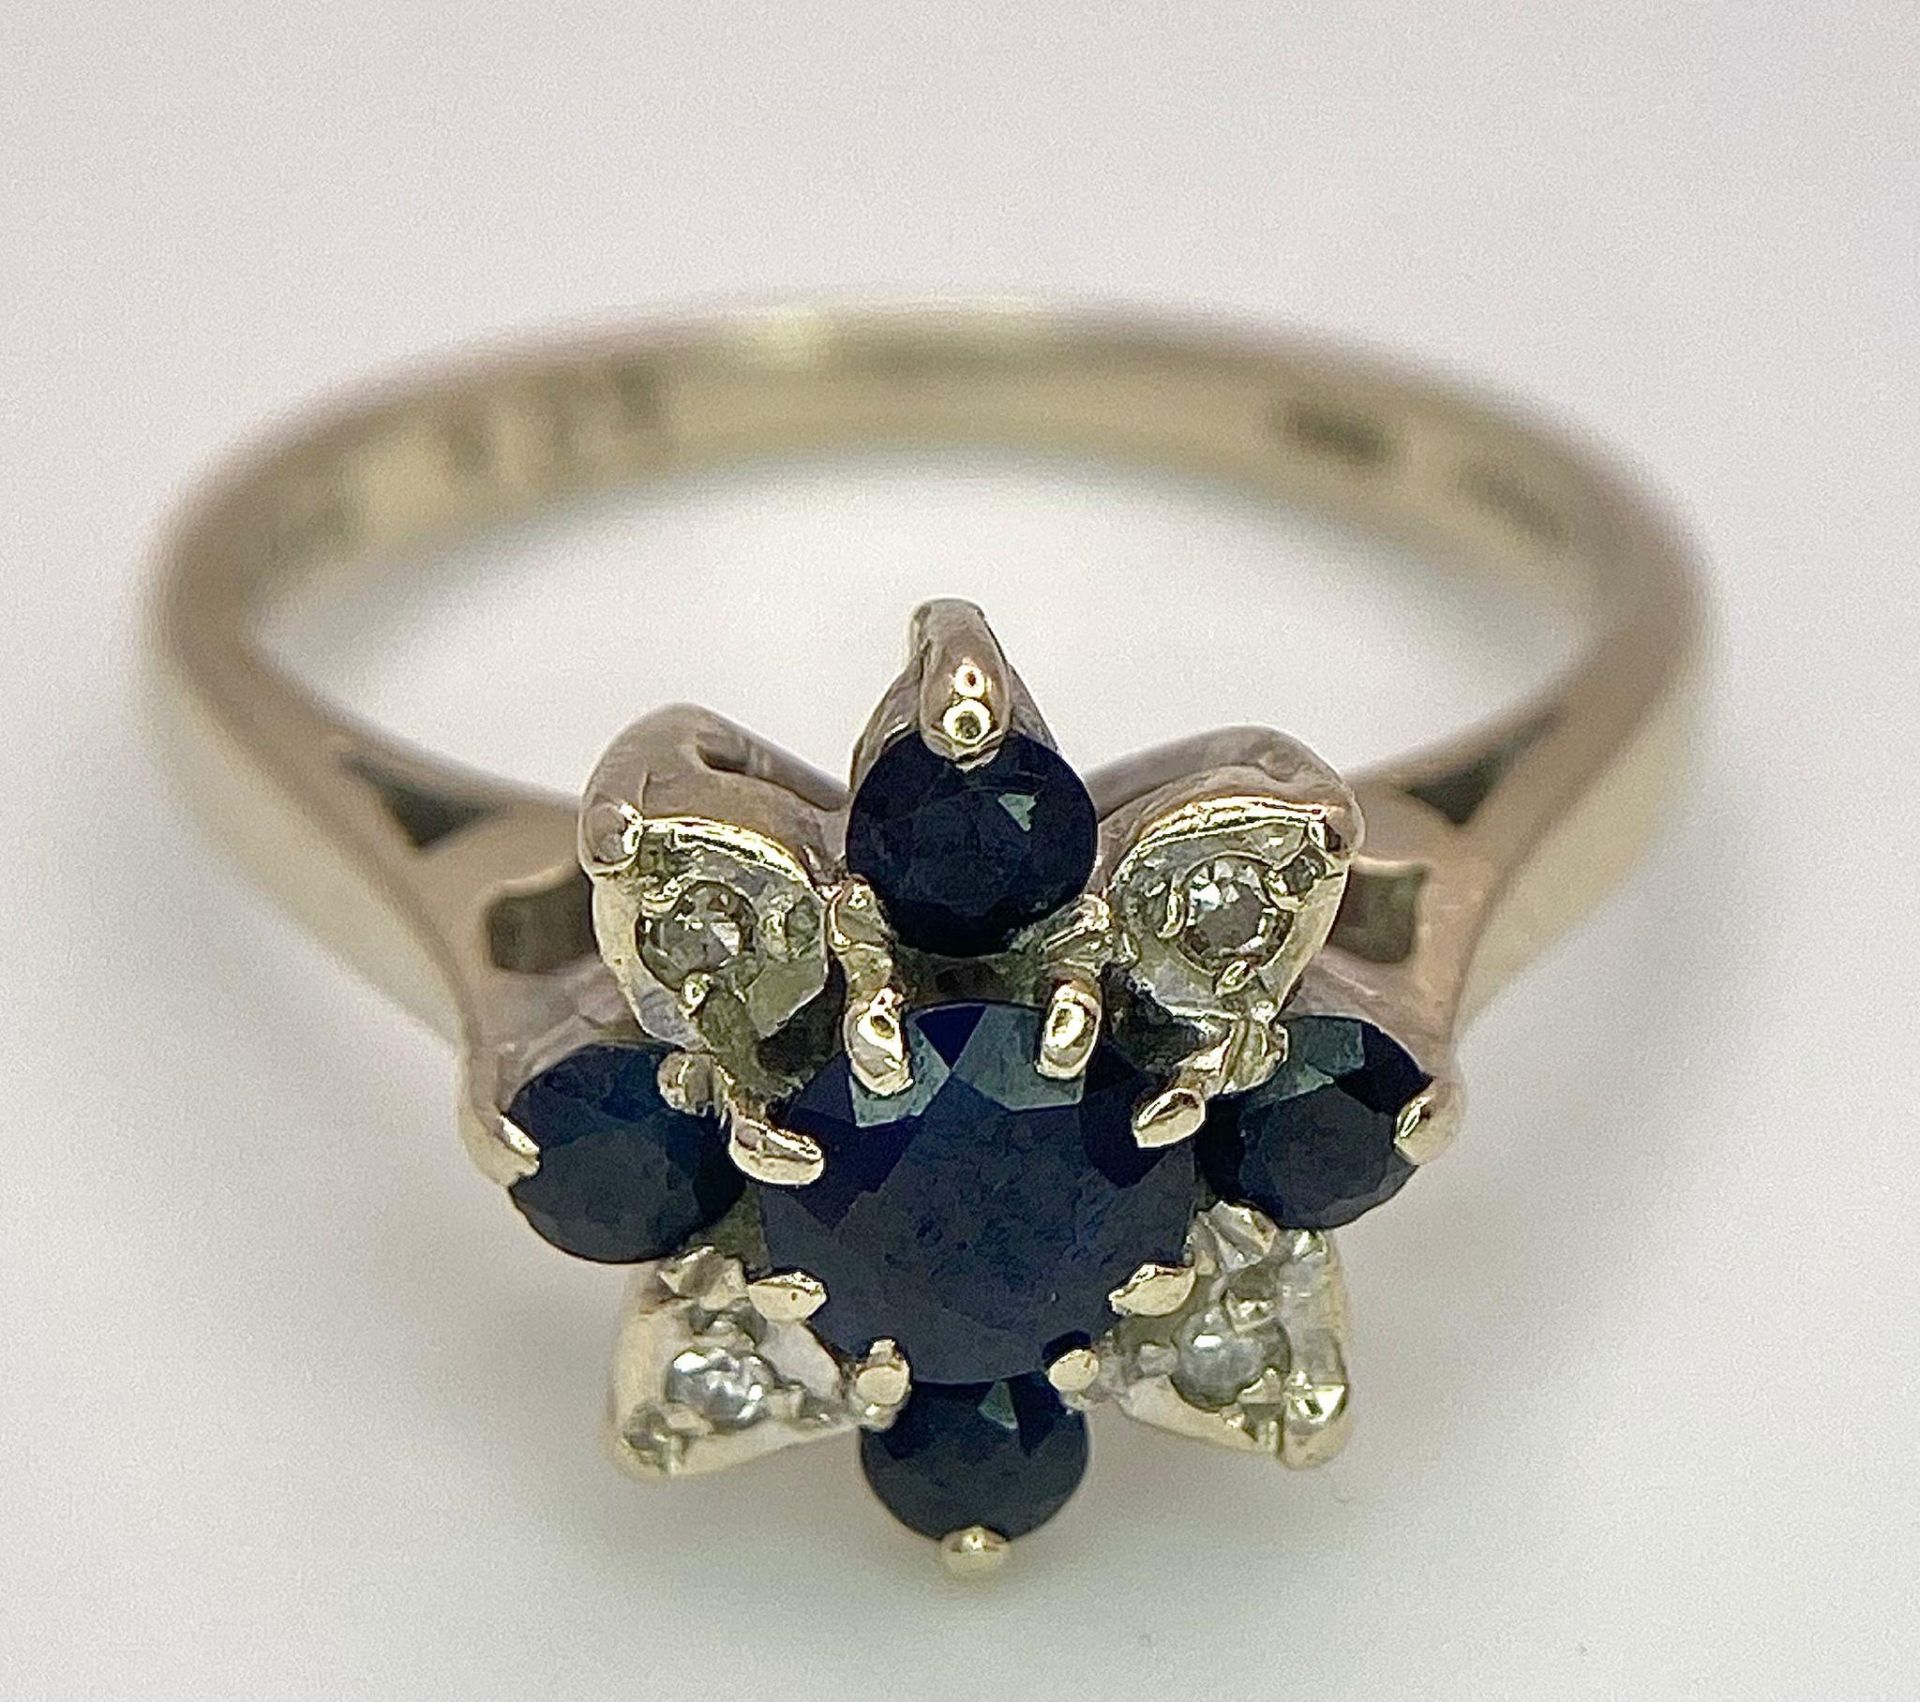 An 18 K white gold ring with a cluster of diamonds and dark blue sapphires. Size: M, weight: 4 g. - Image 4 of 6